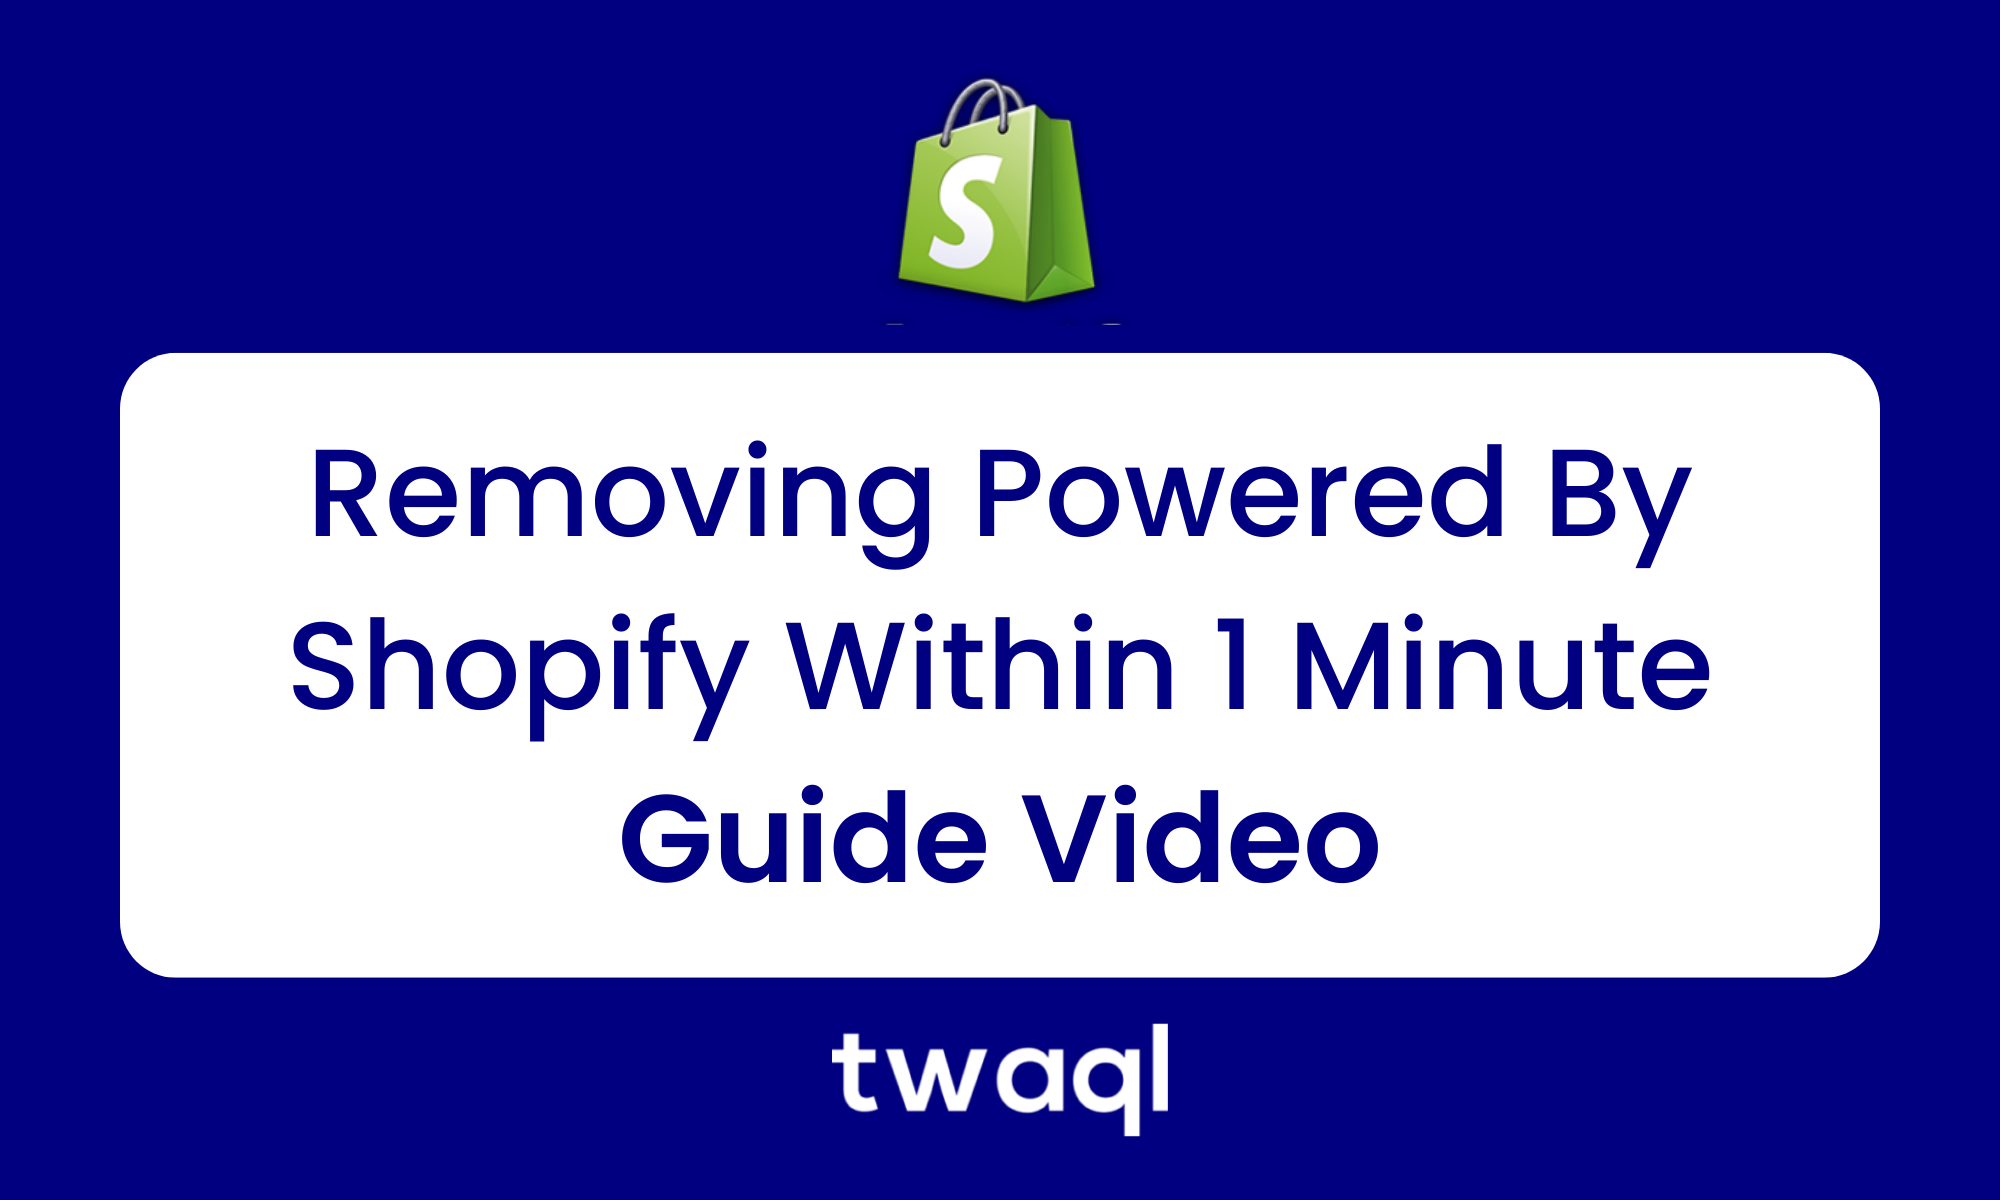 Removing Powered by Shopify Within 1 Minute Guide Video